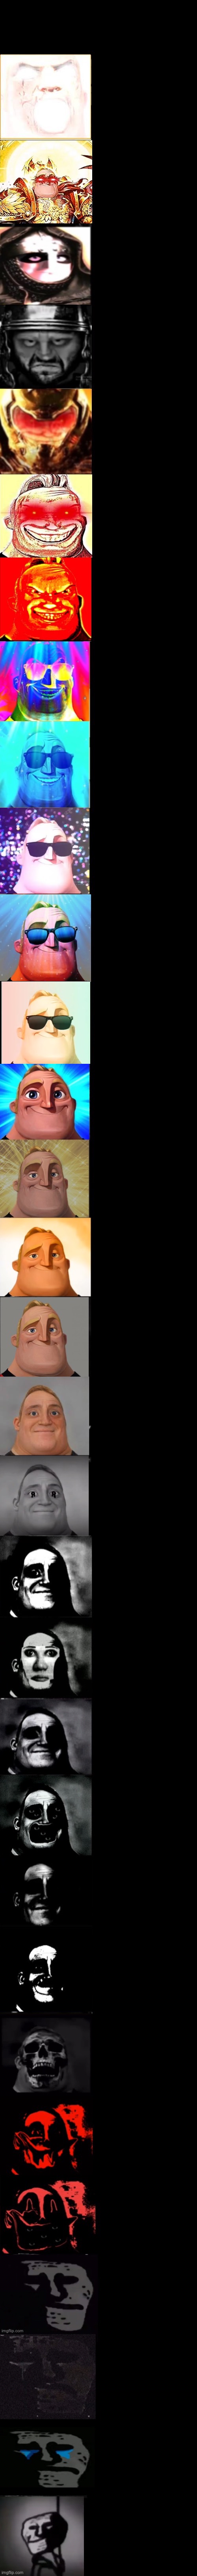 High Quality Mr Incredible Becoming Canny to Uncanny Super Extended Blank Meme Template